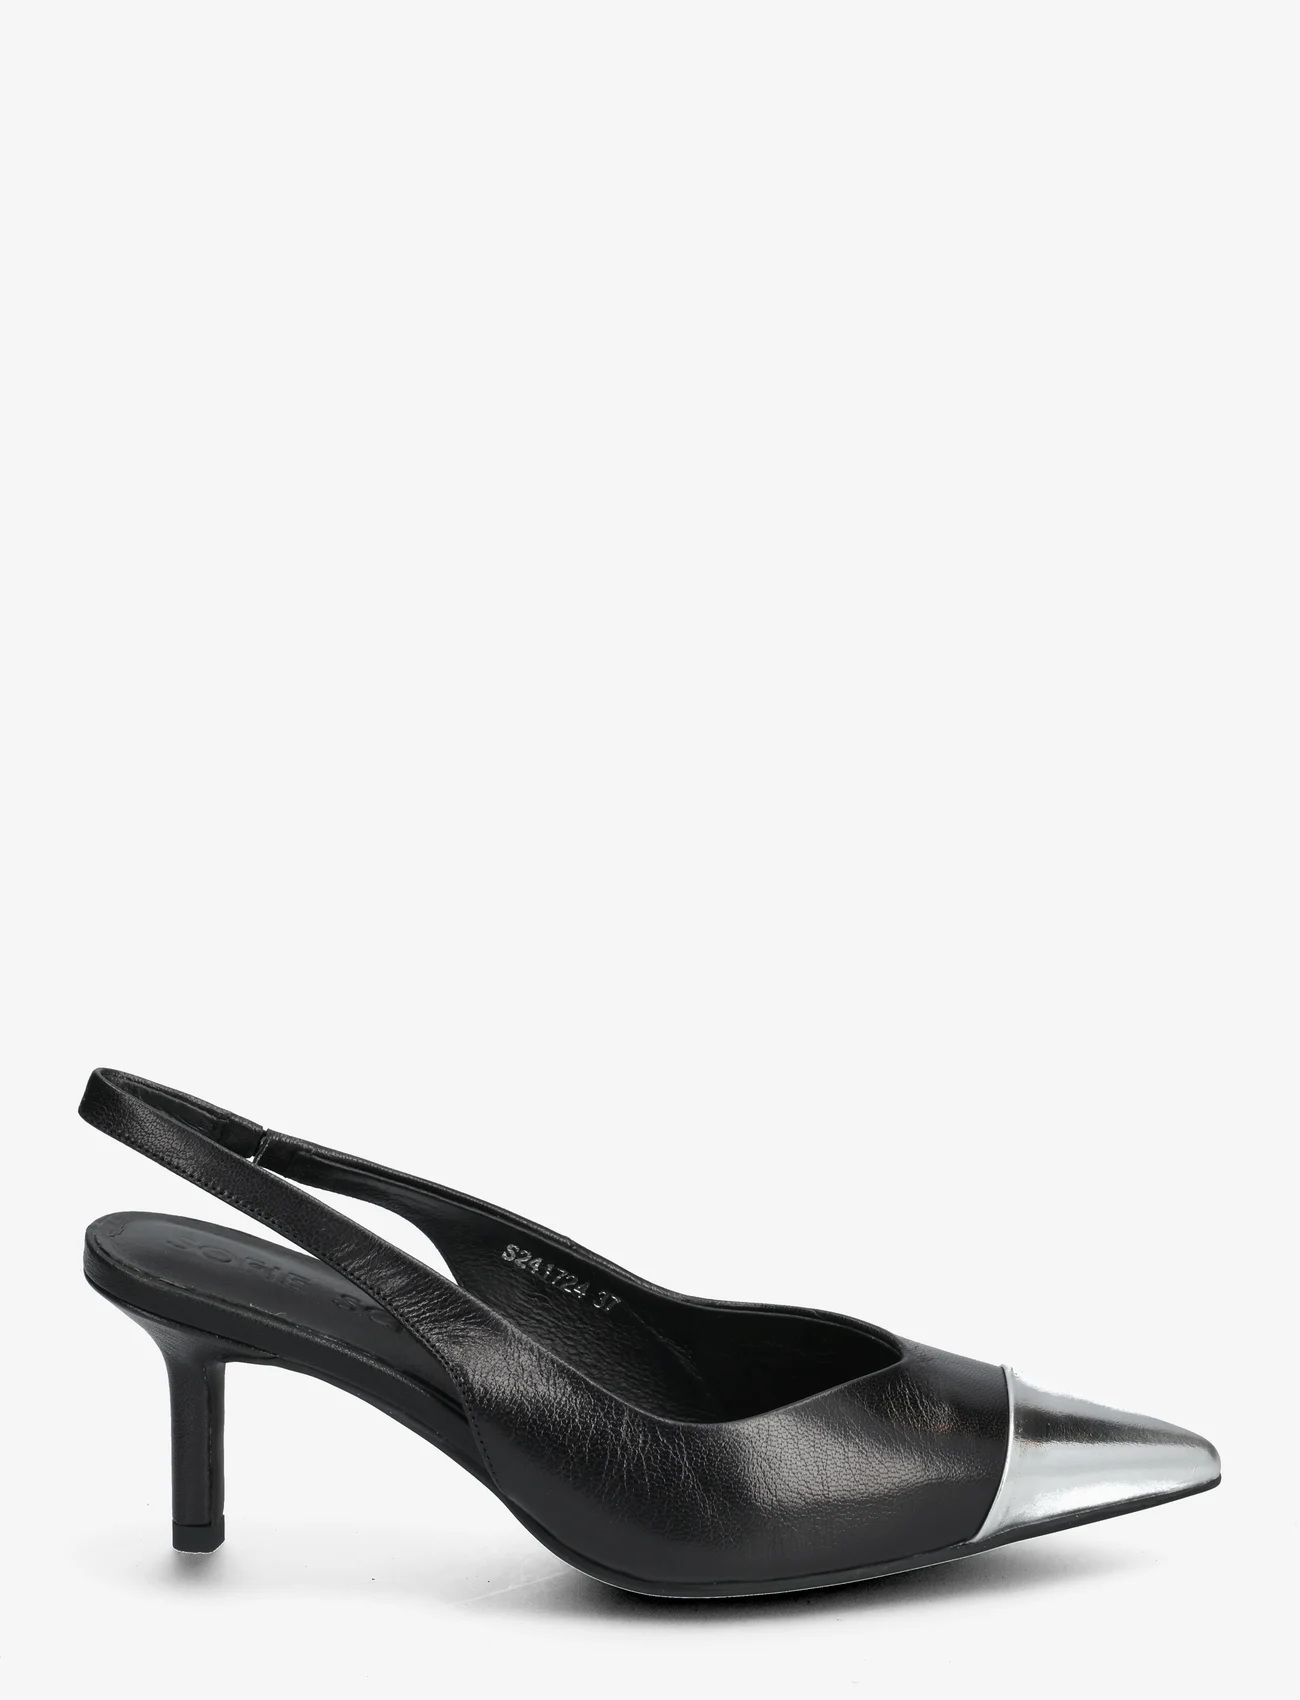 Sofie Schnoor - Stiletto - party wear at outlet prices - black - 1